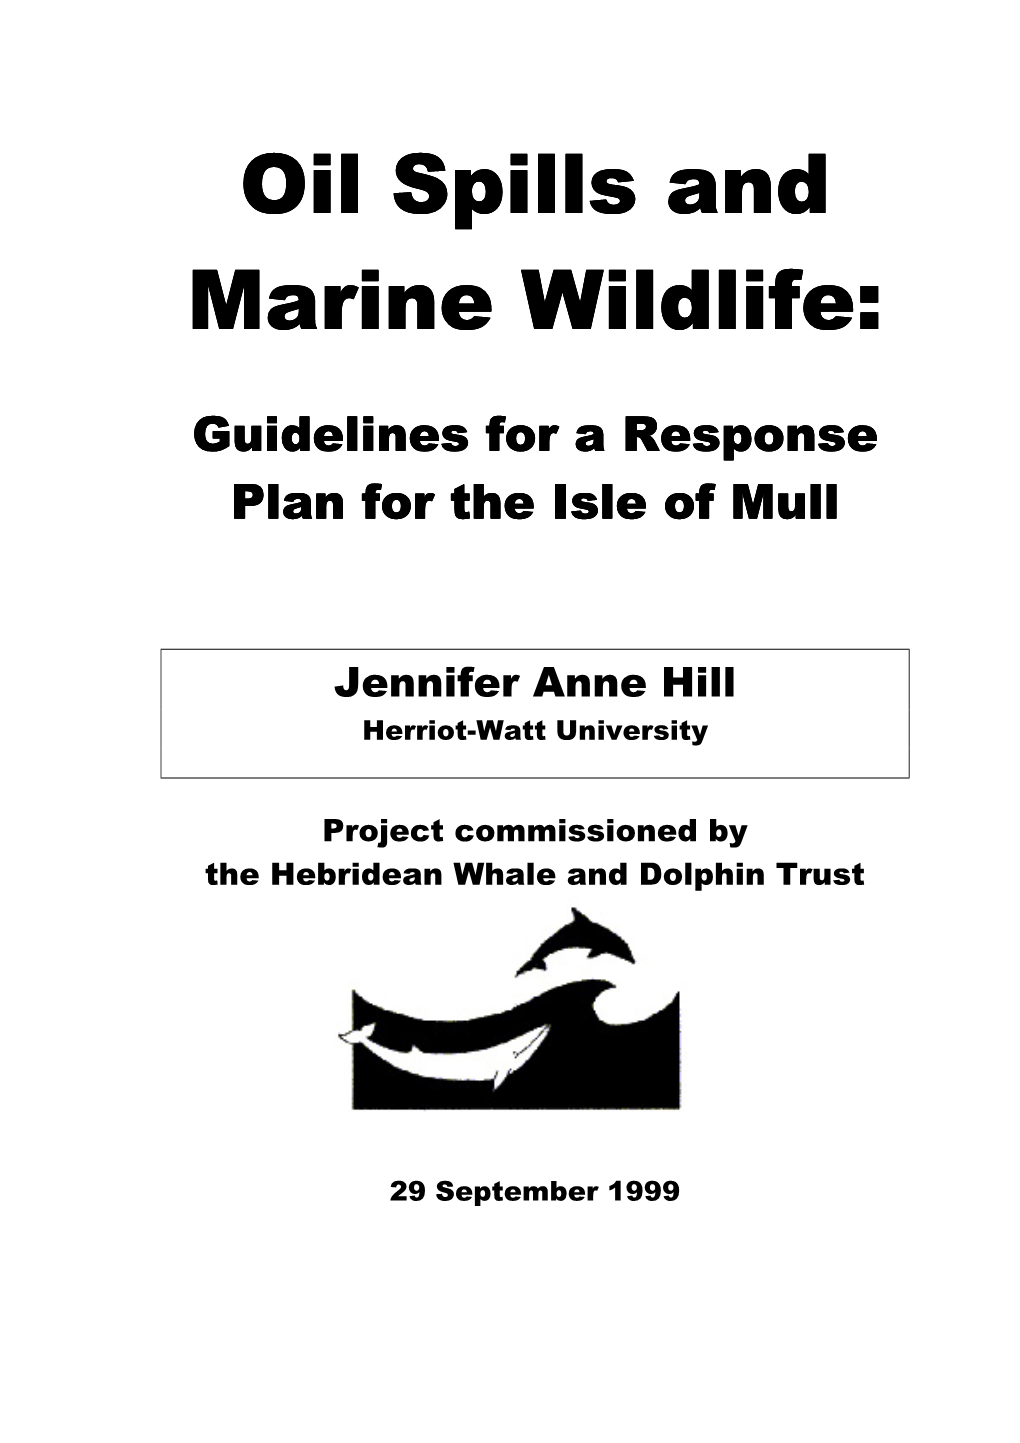 Guidelines for a Wildlife Response Plan